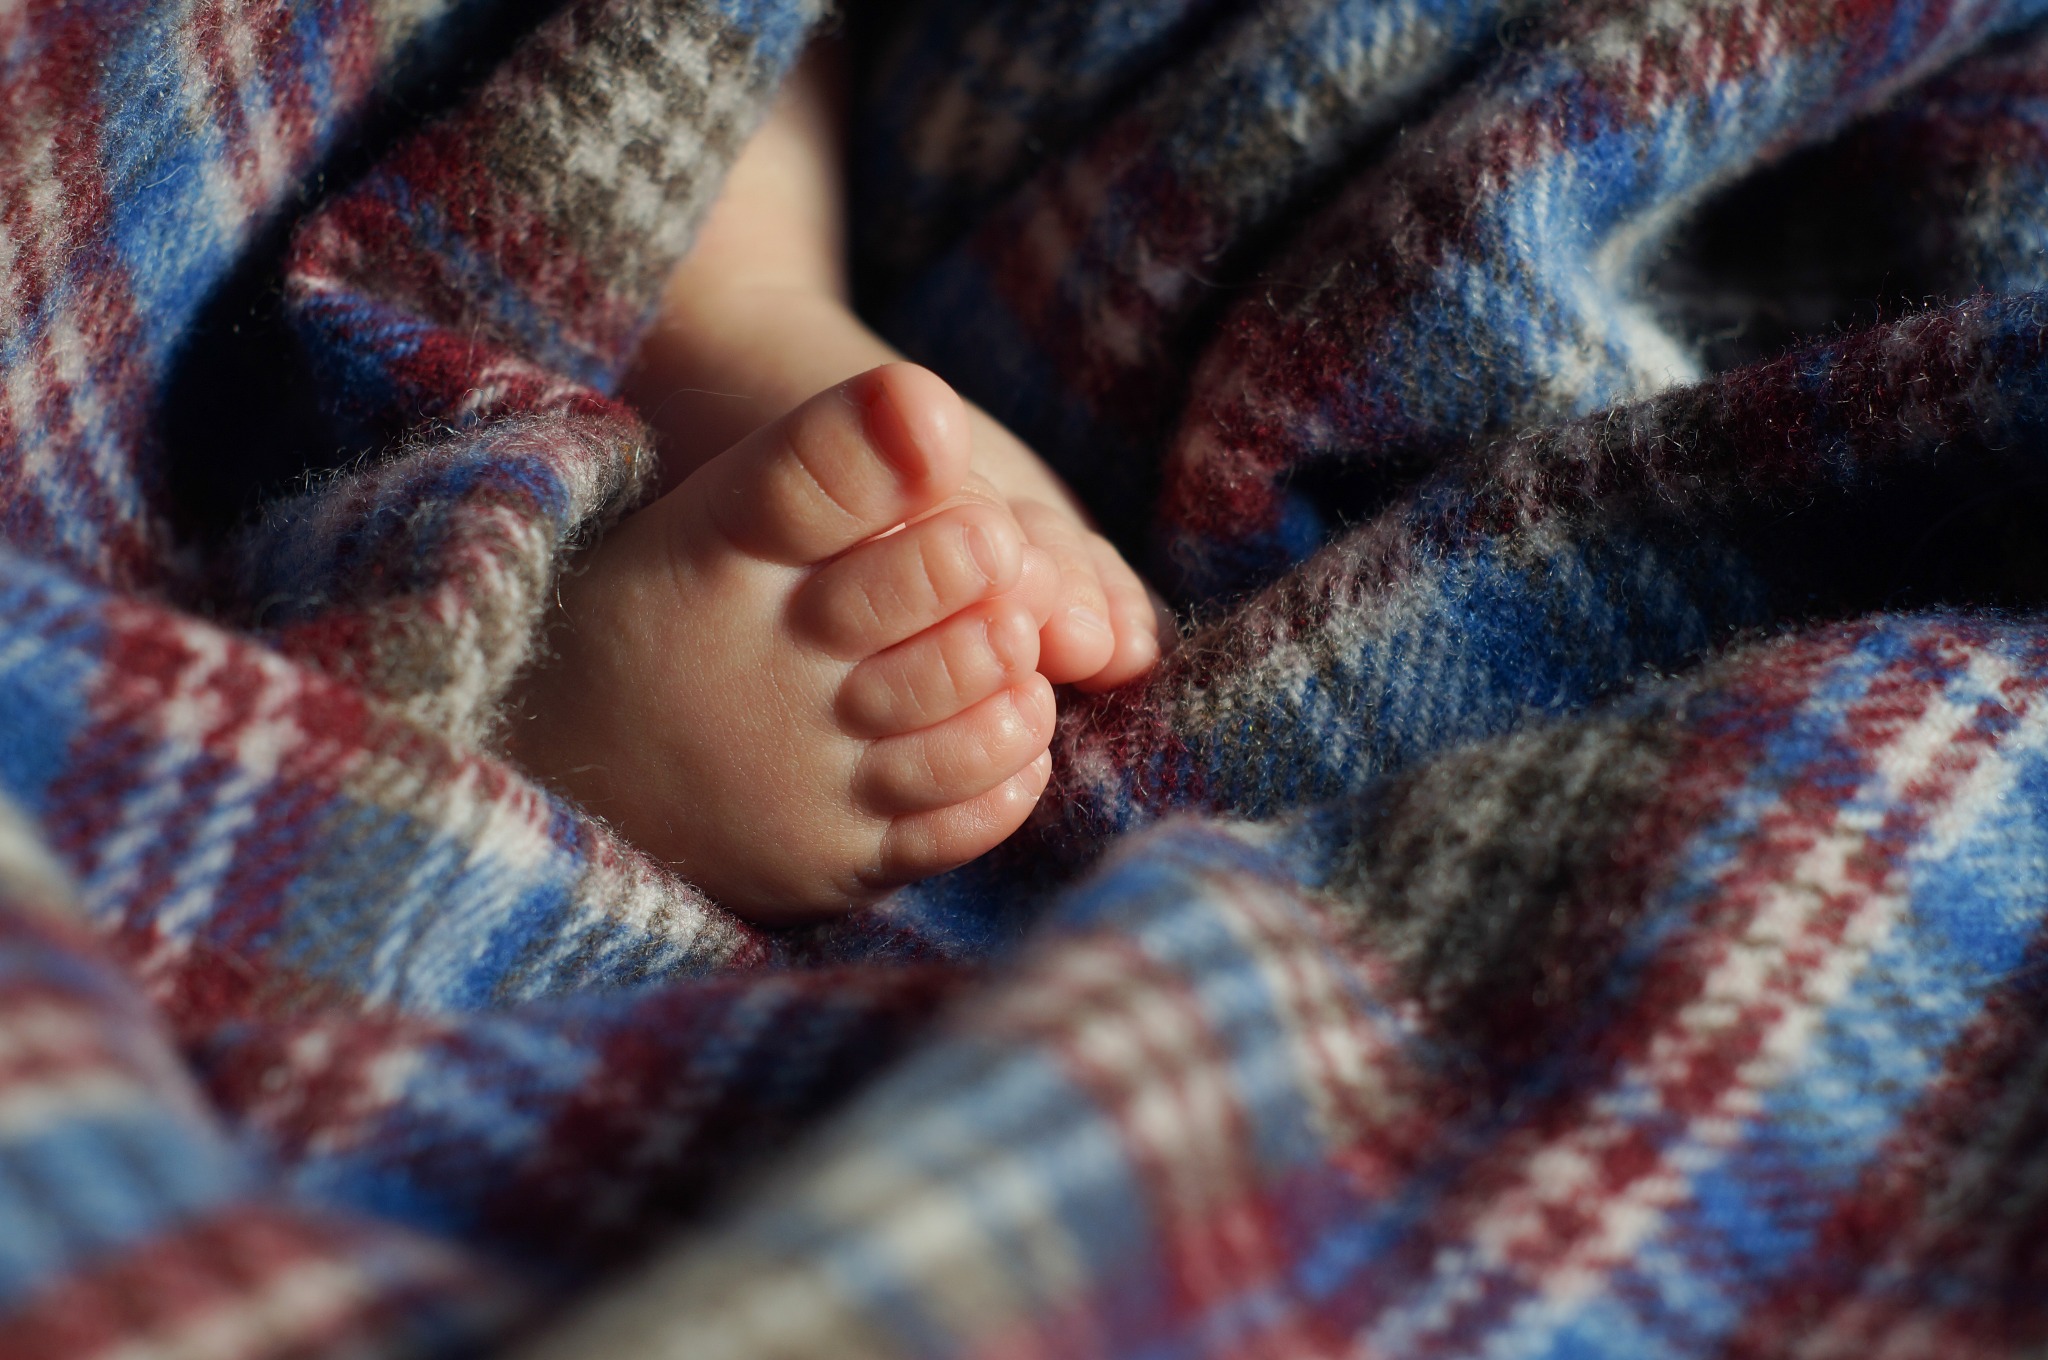 25 Scottish Baby Names to Keep Tradition Alive